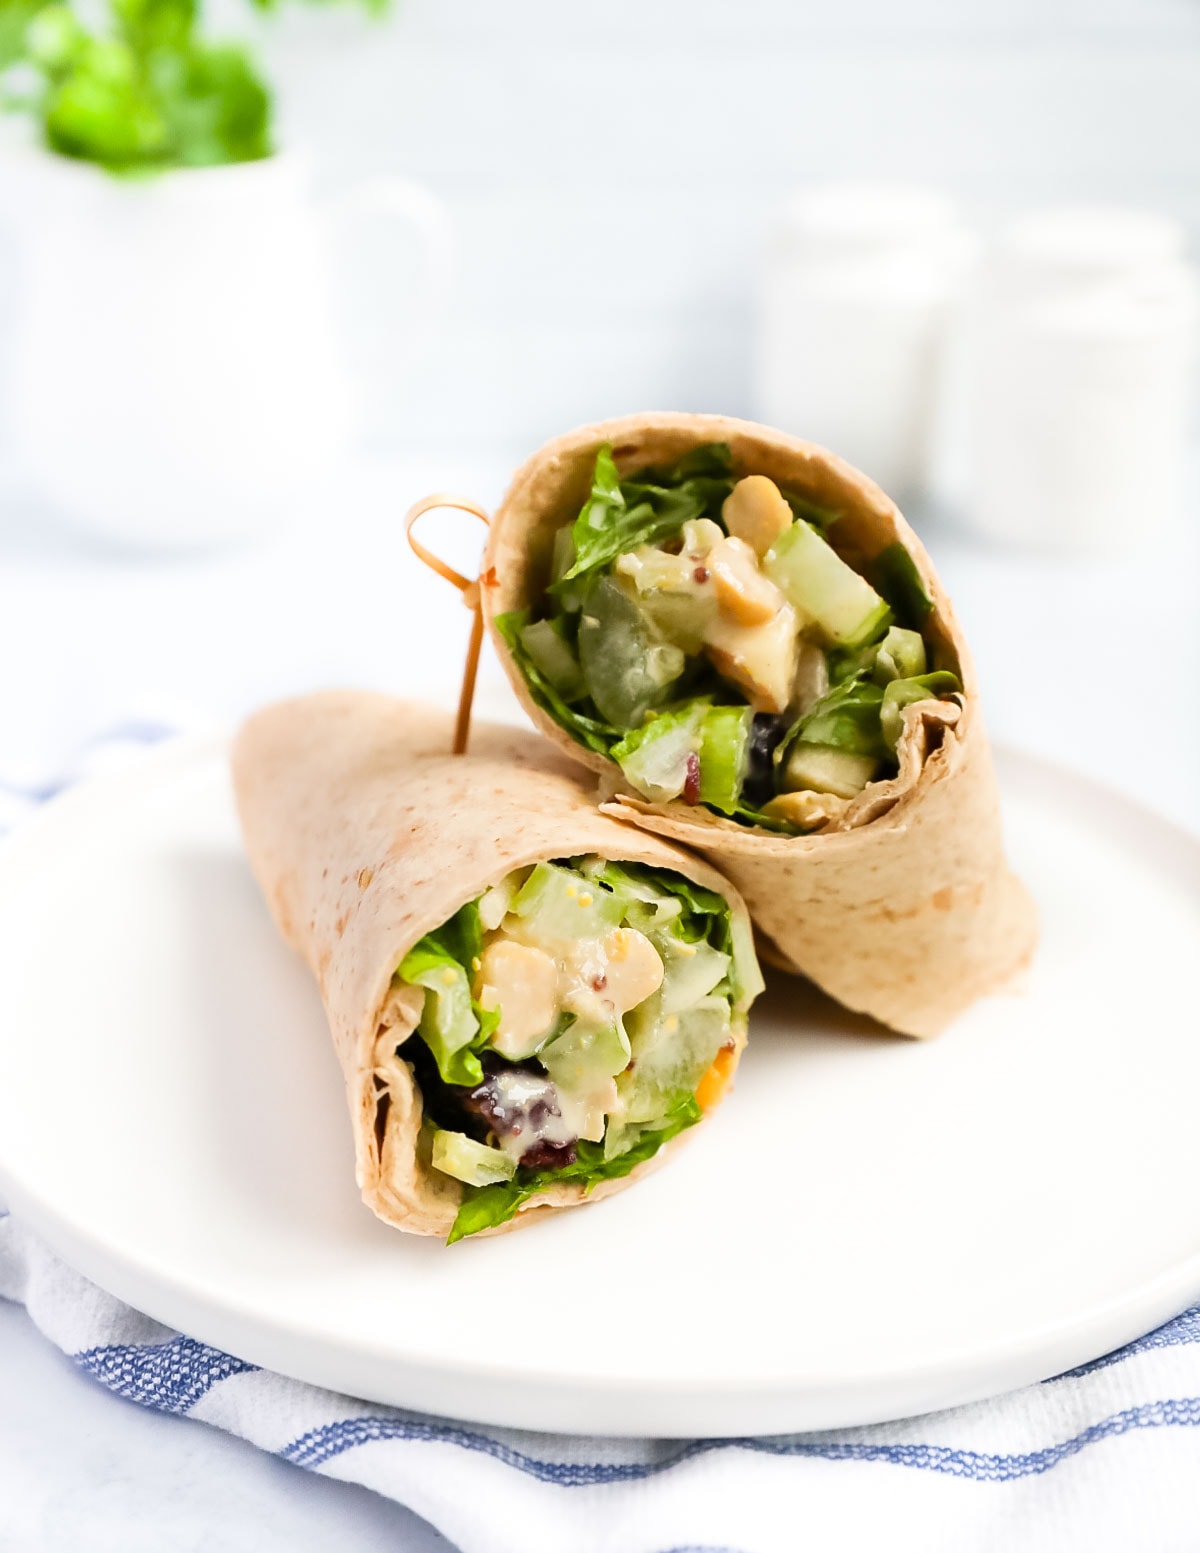 A wrap with fresh vegetables inside it on a white plate.